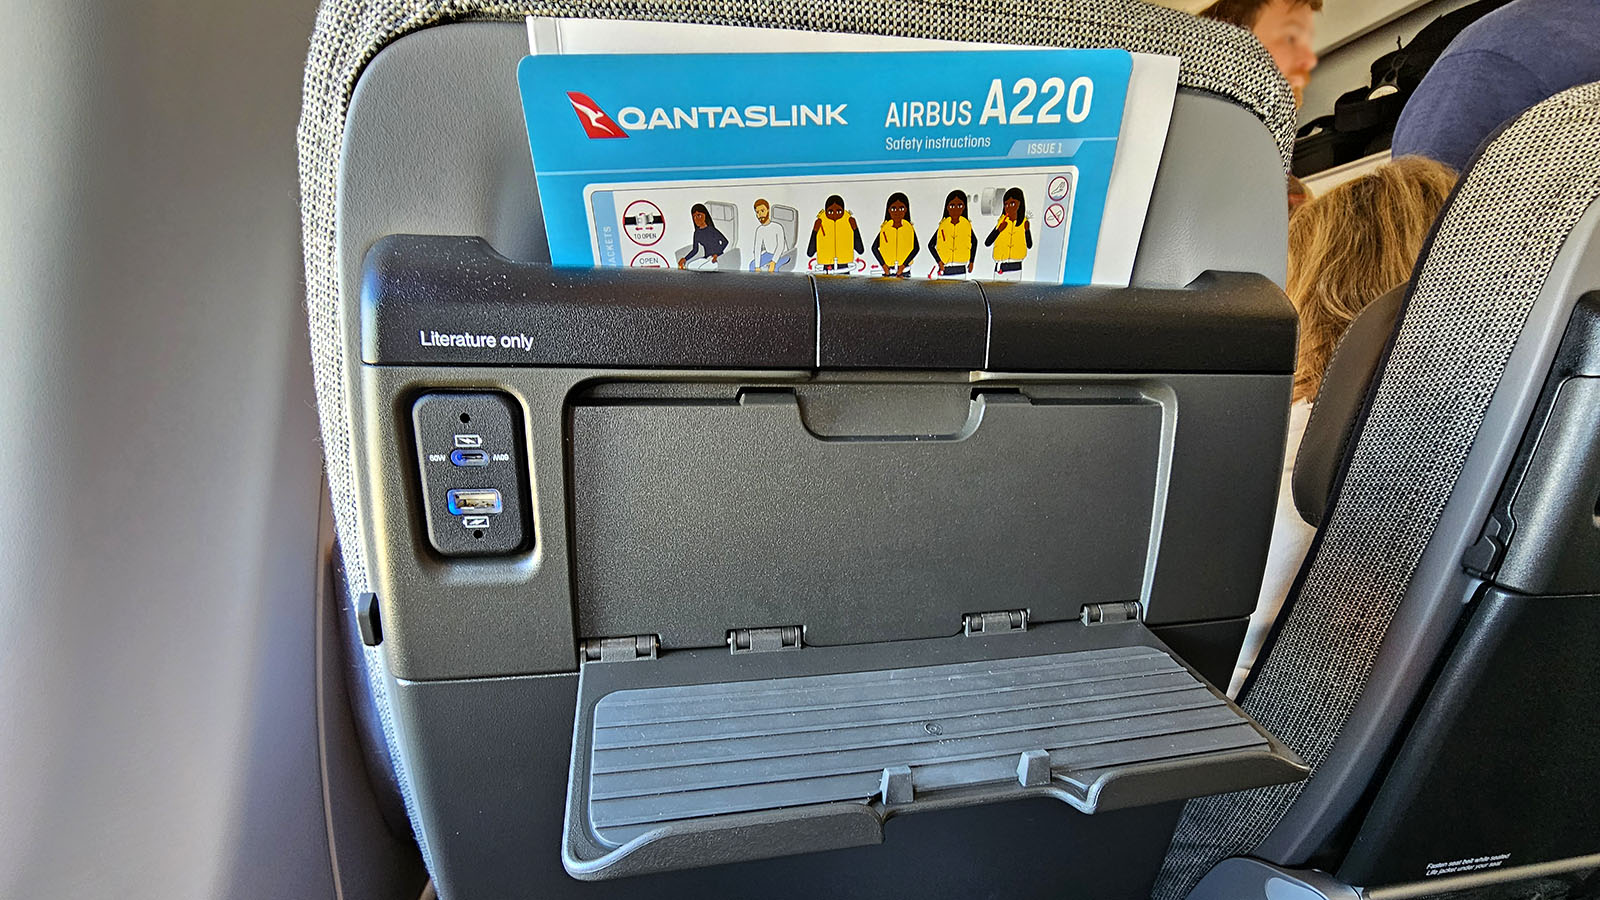 Device holder in QantasLink Airbus A220 Economy